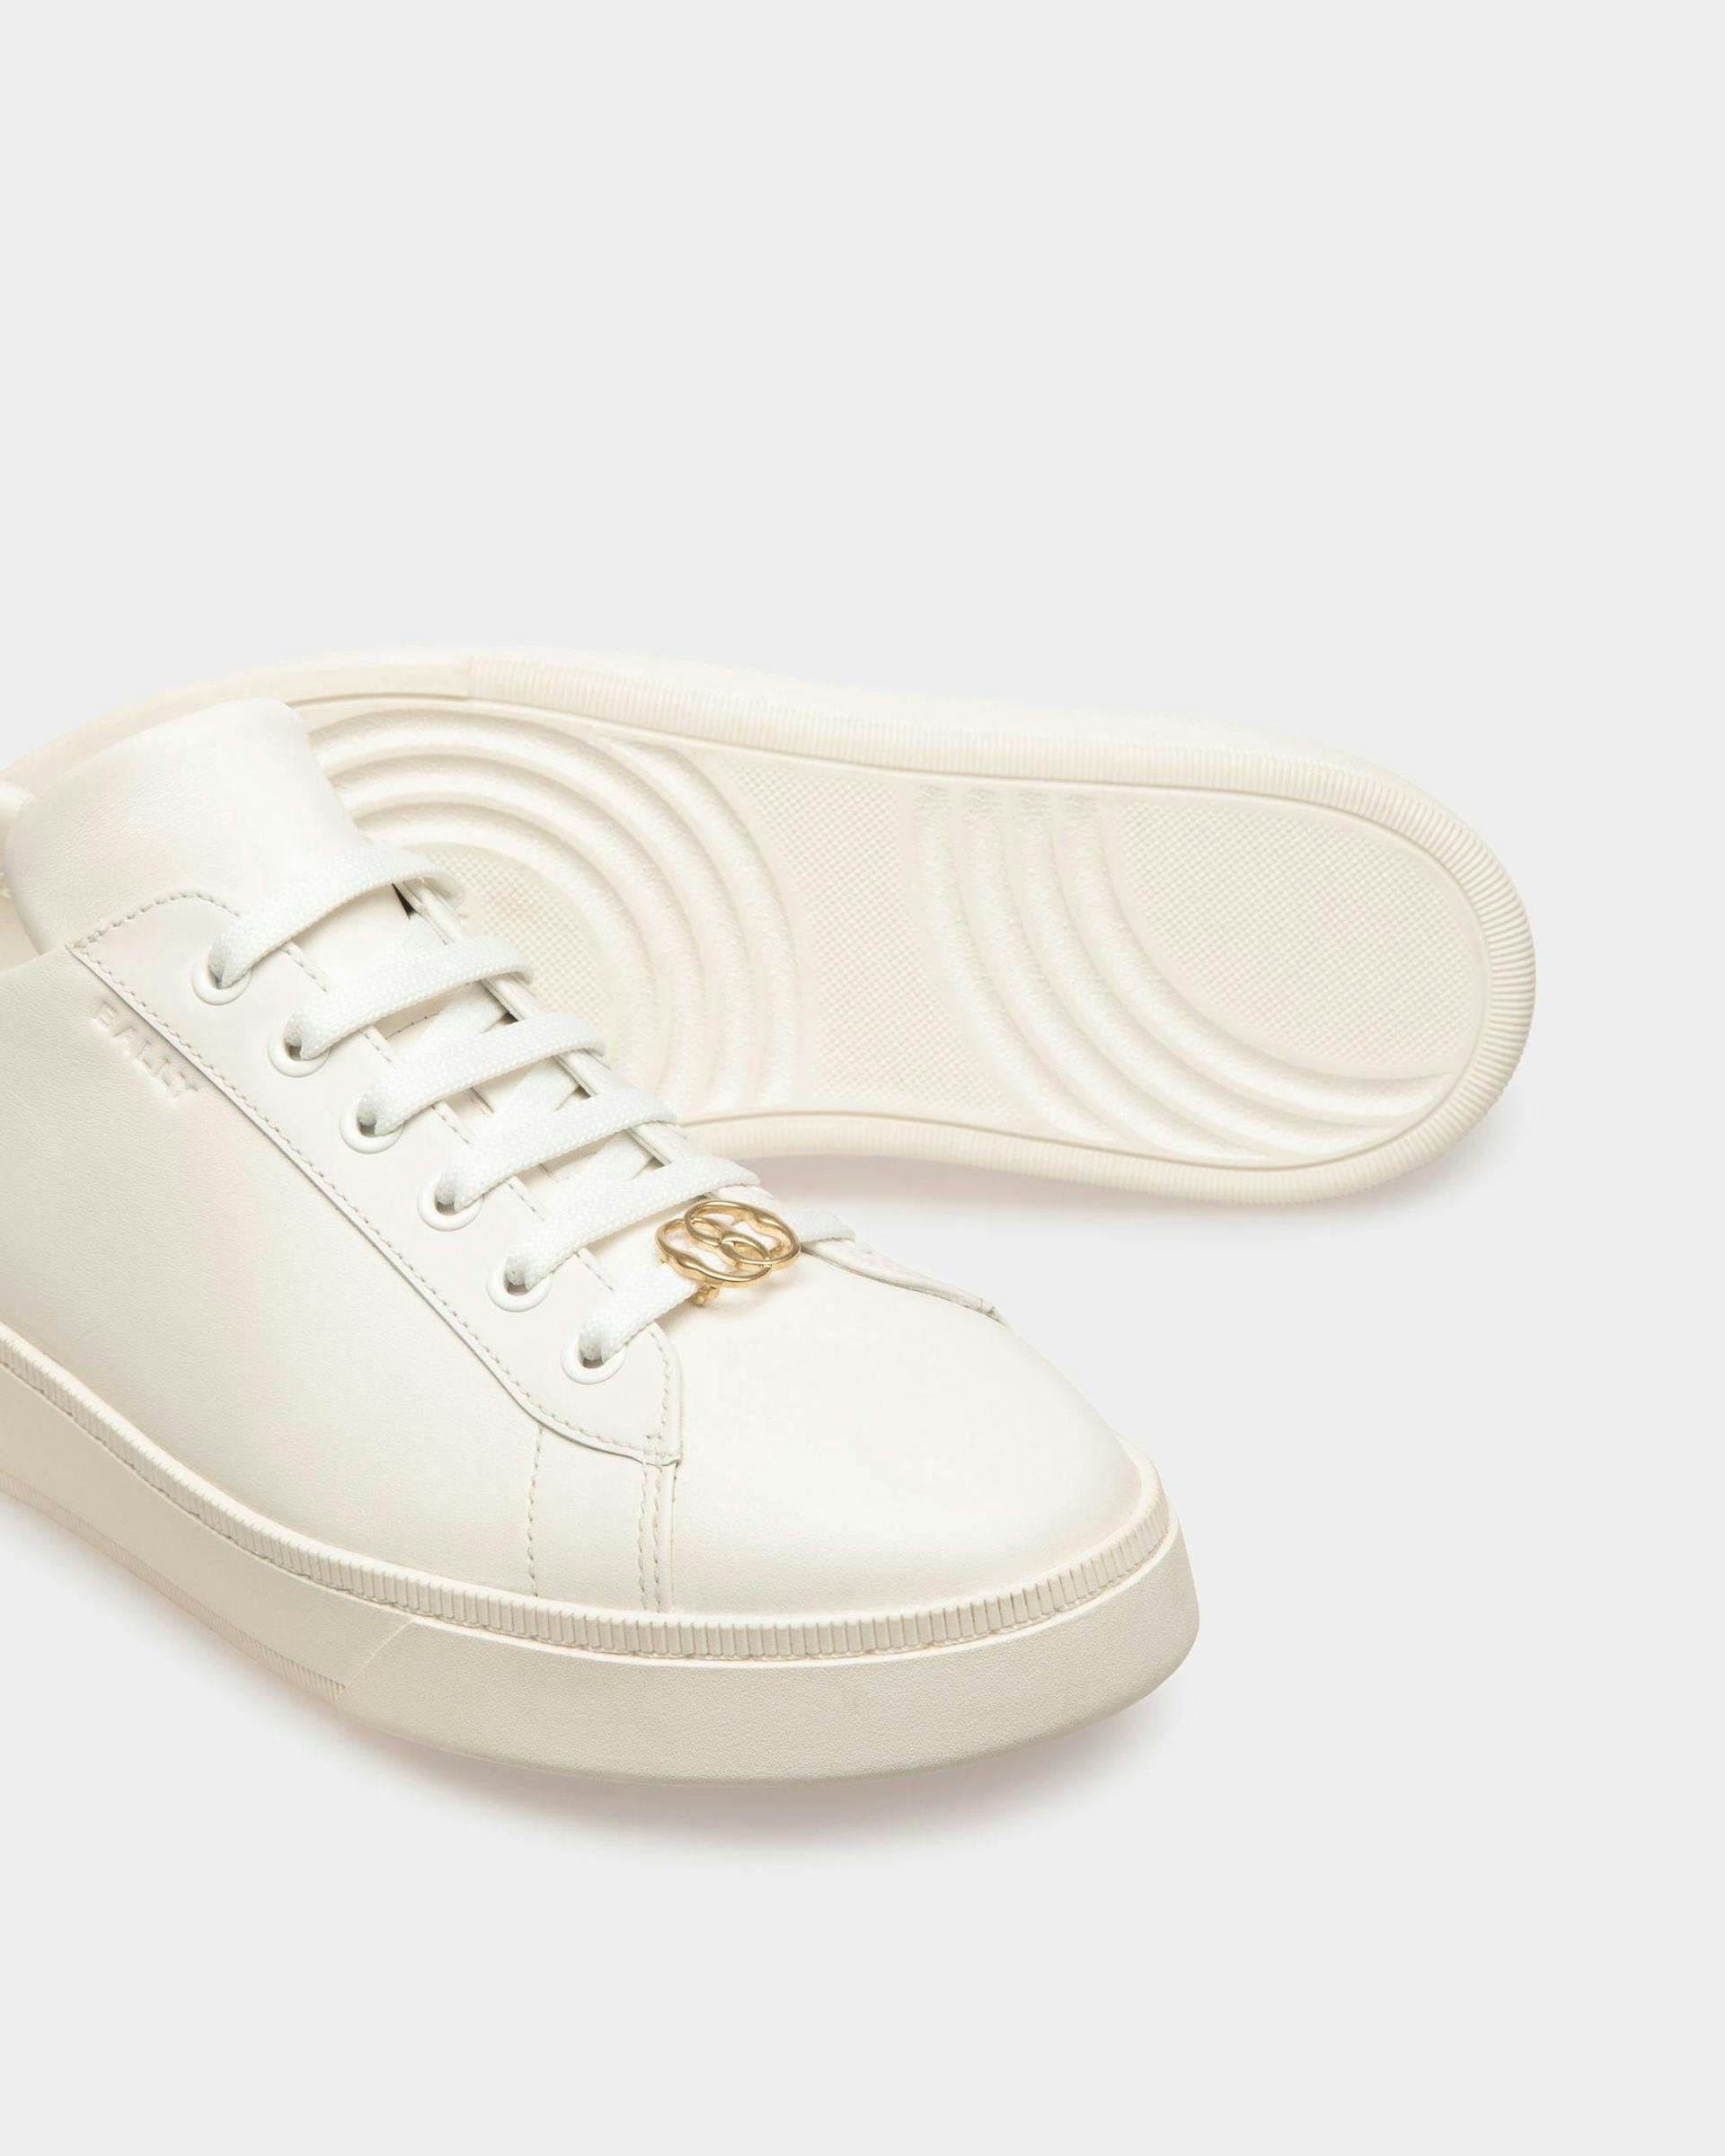 Raise Sneakers In White Leather - Men's - Bally - 06